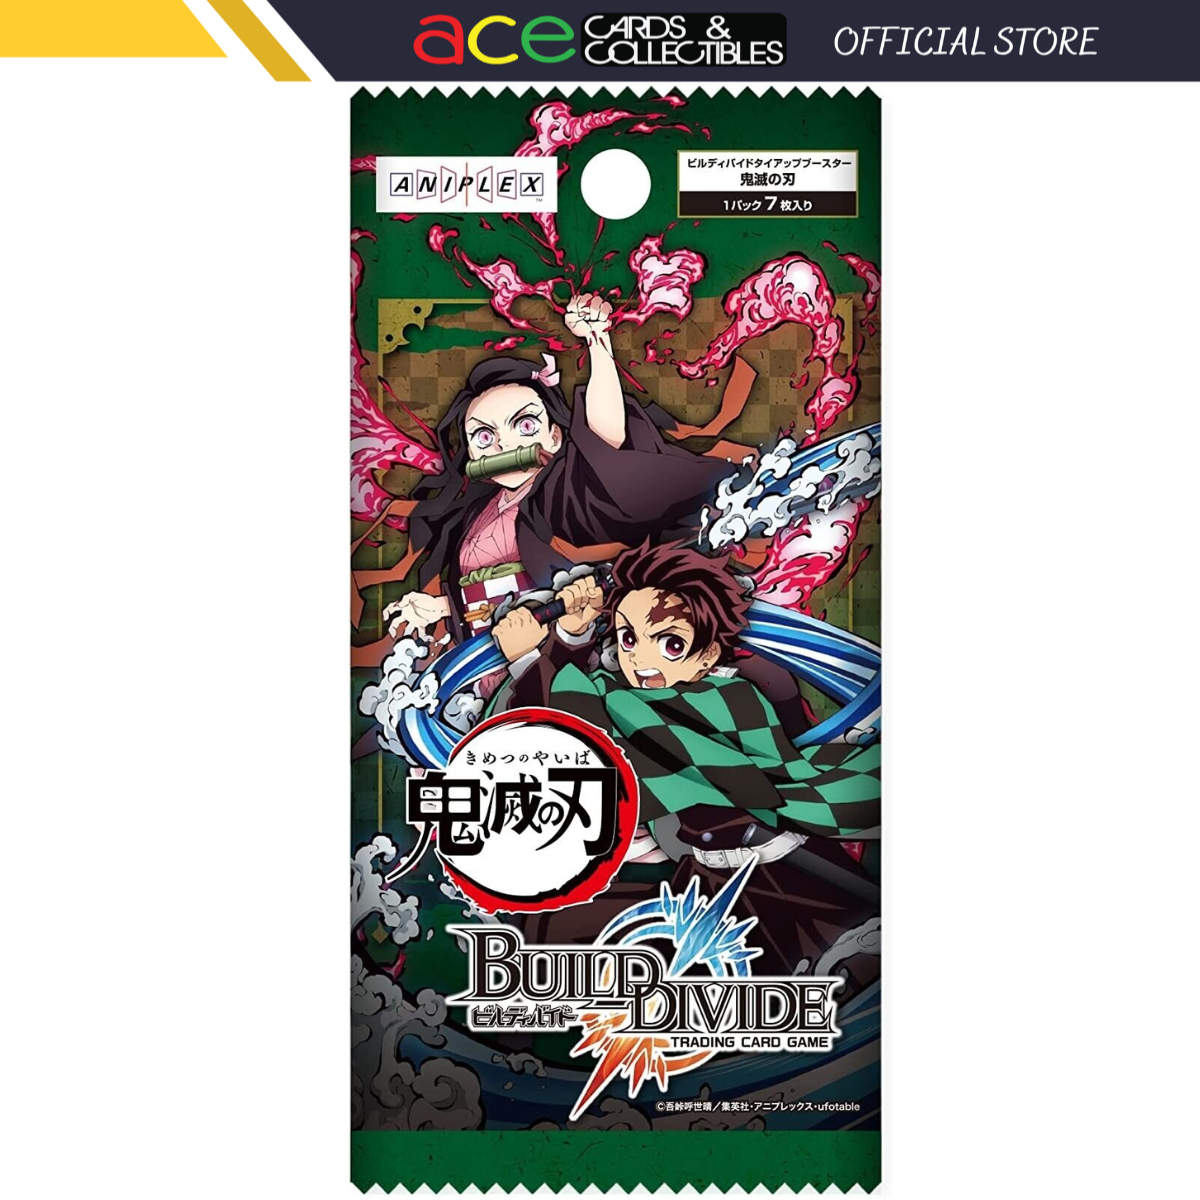 Build Divide Collaboration Booster "Demon Slayer: Kimetsu no Yaiba" [BD-KM-TB1] (Japanese)-Booster Pack (Random)-Aniplex-Ace Cards & Collectibles